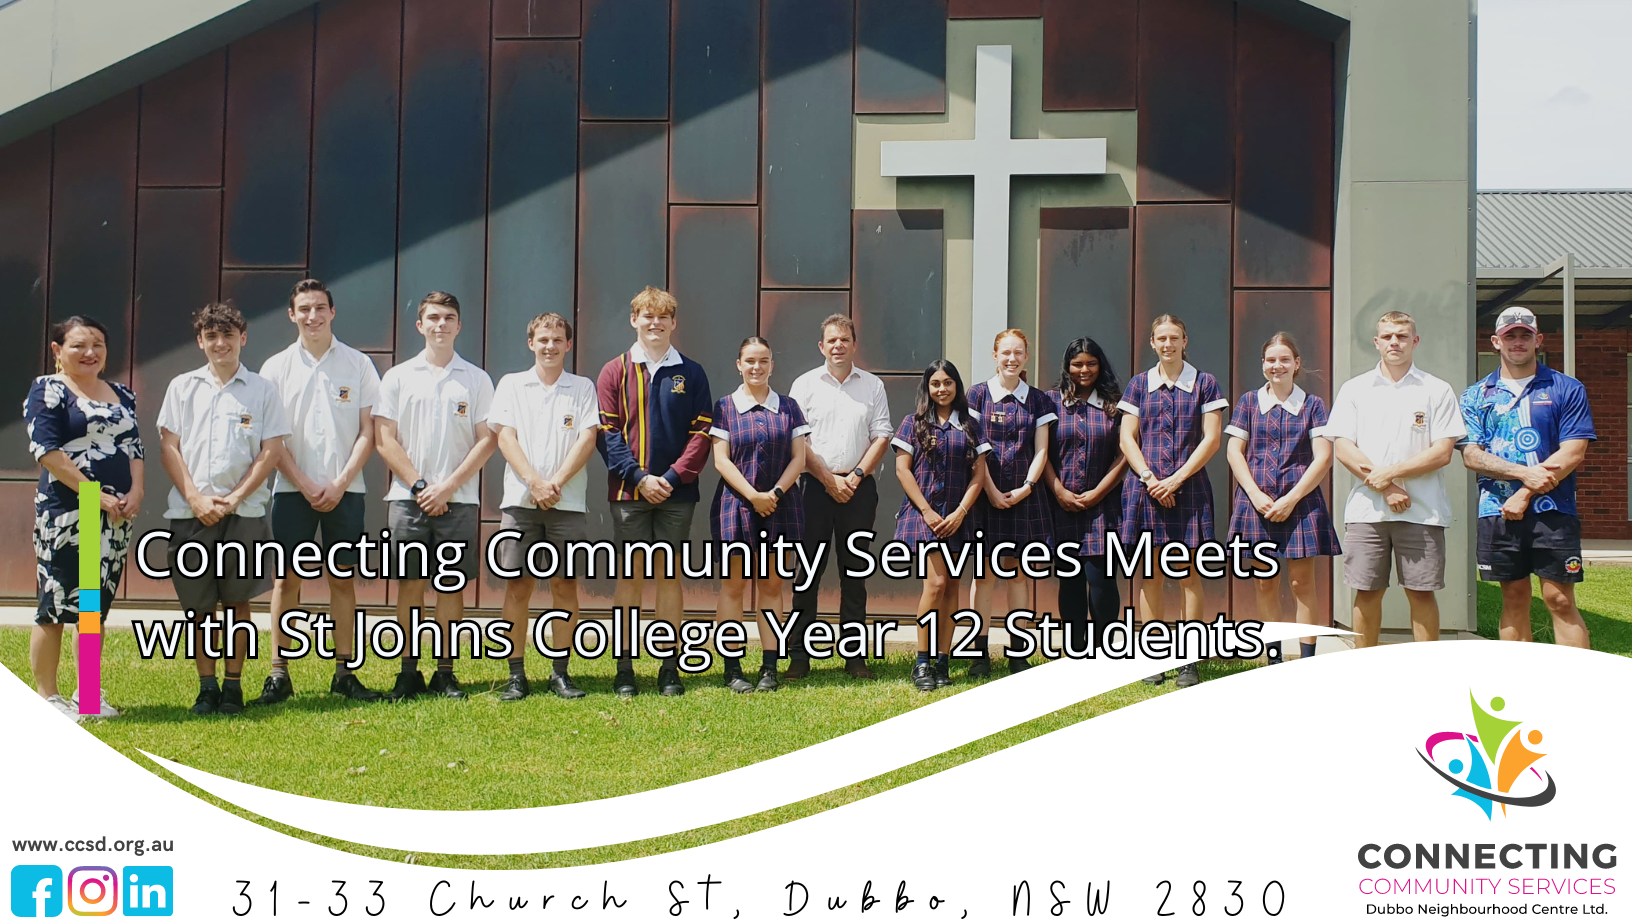 St John's College students name Connecting Community Services as their Charity in 2024